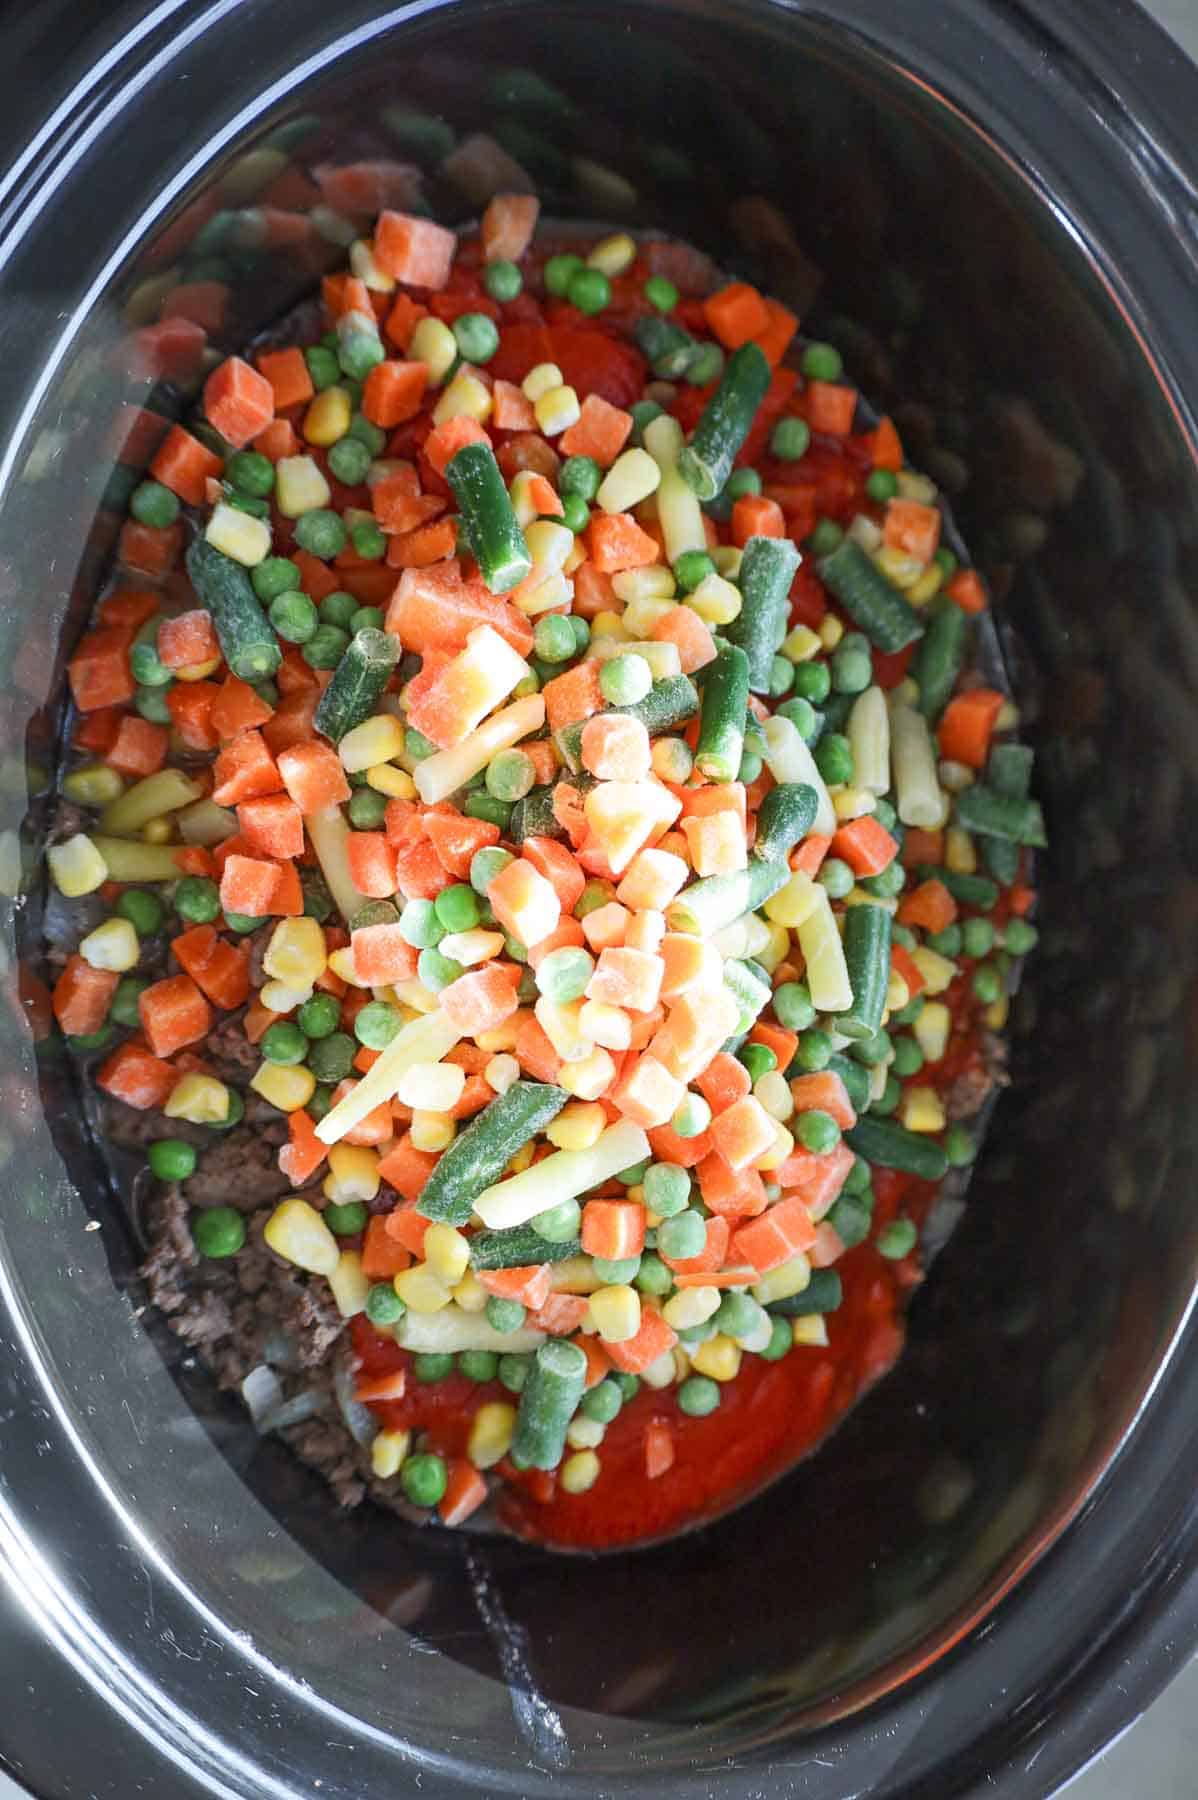 frozen mixed vegetables on top of diced tomatoes, tomato sauce and ground beef in a slow cooker